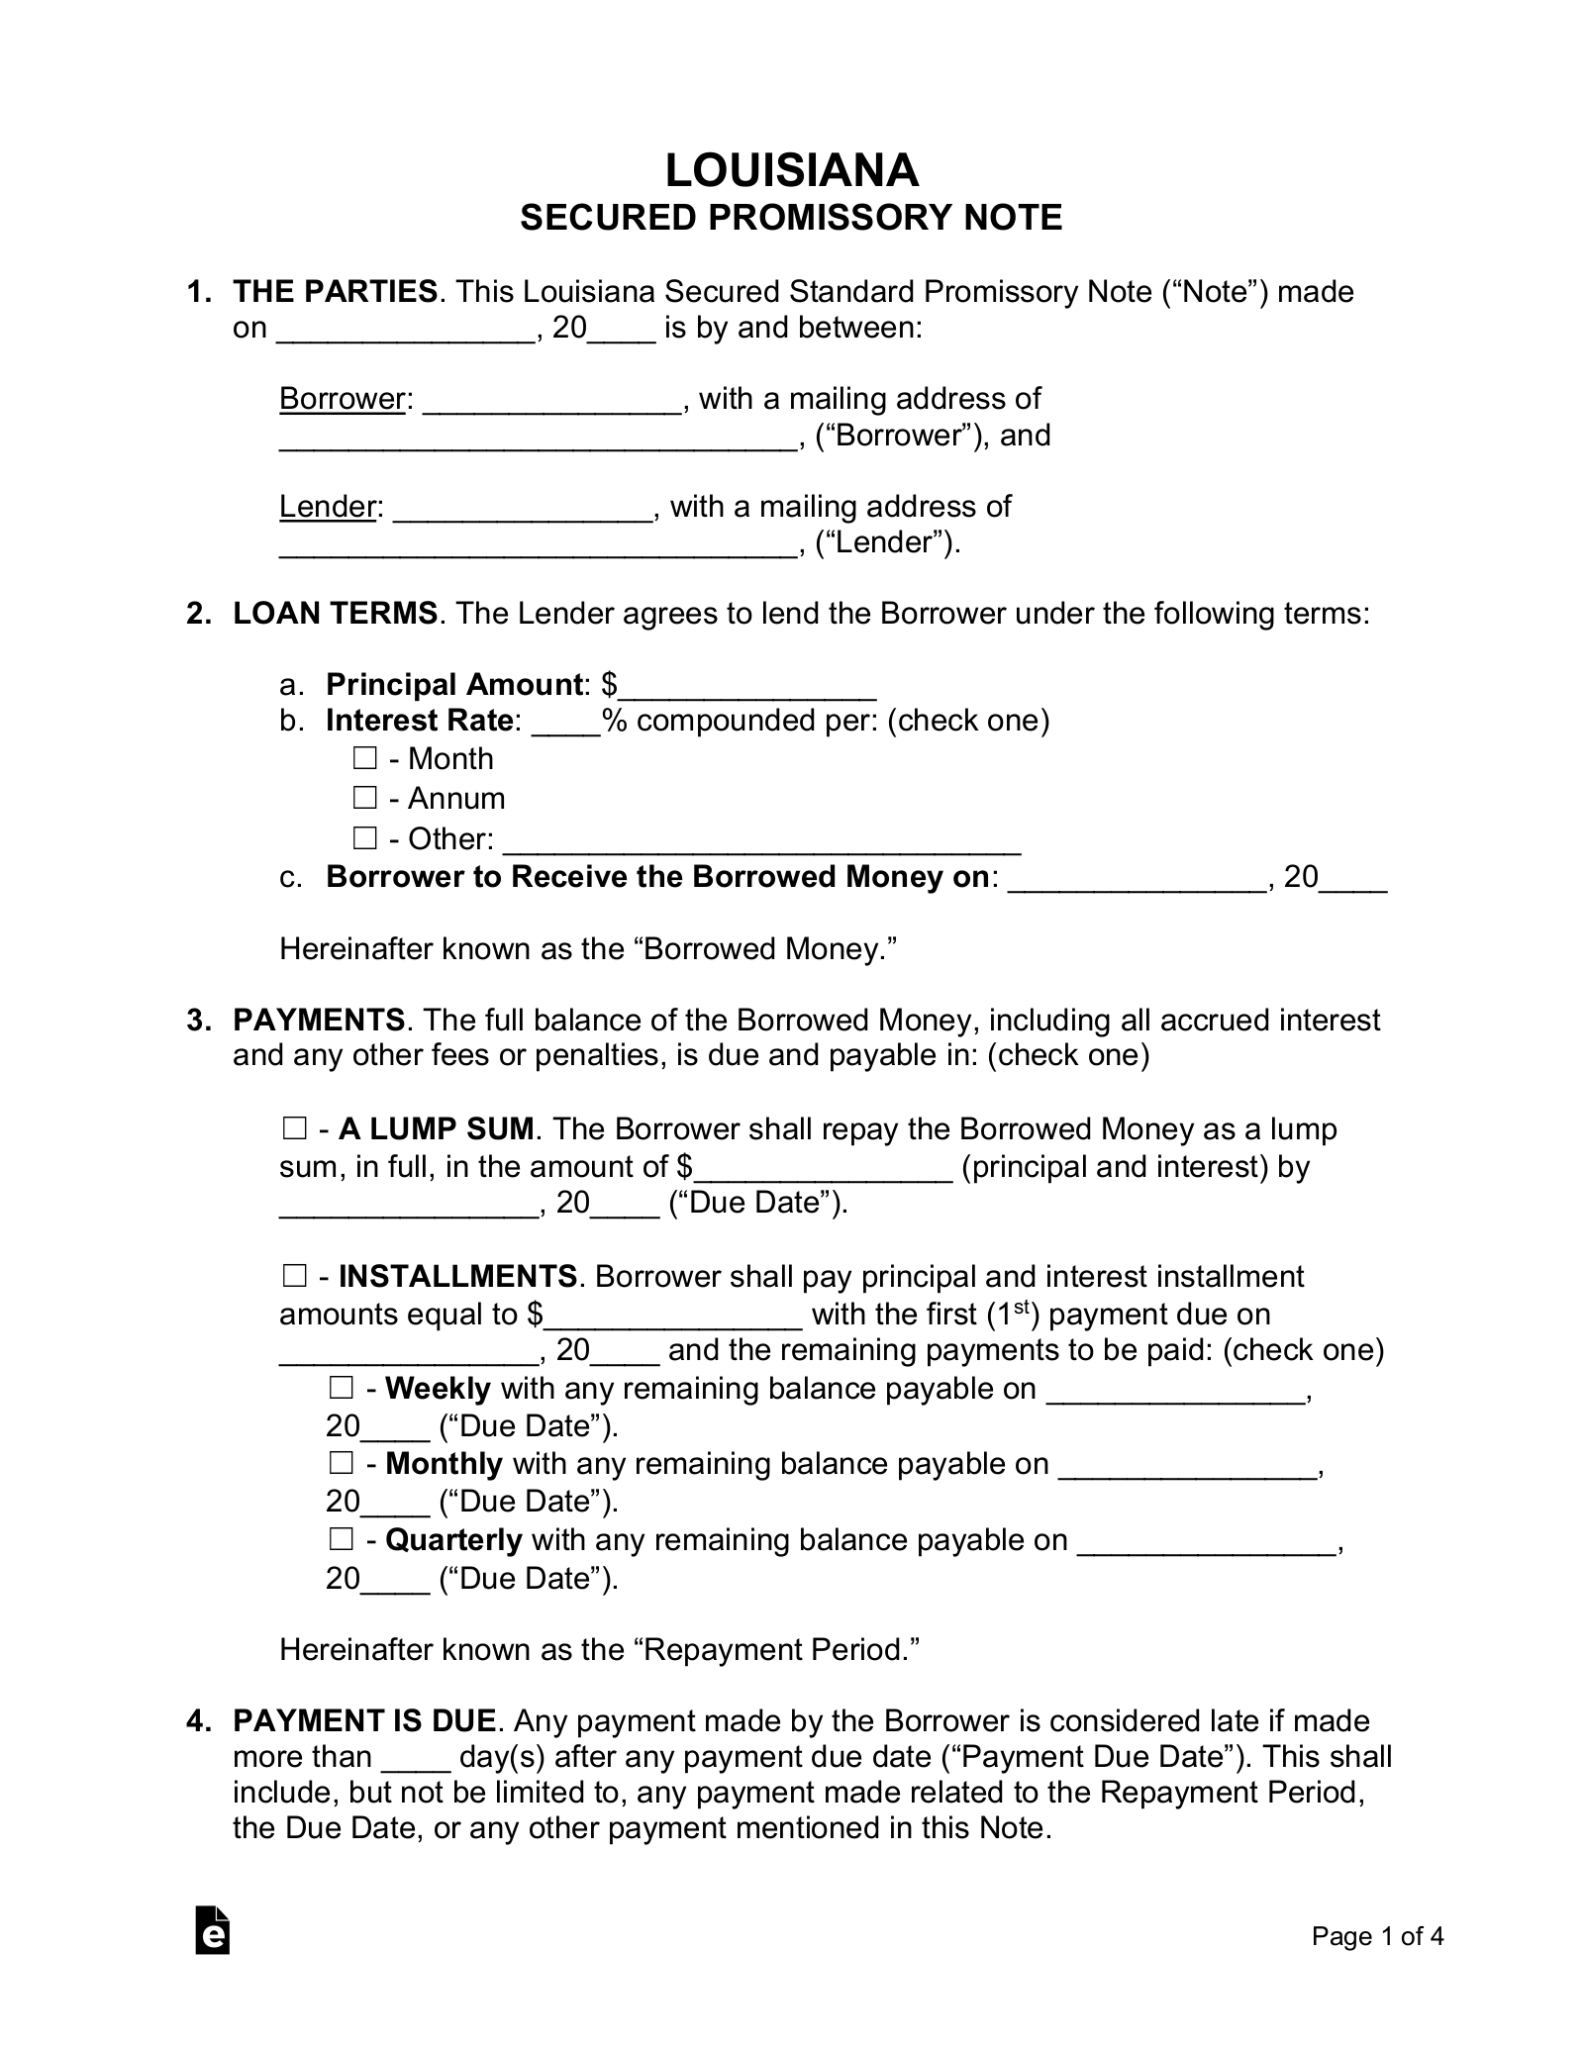 Free Louisiana Secured Promissory Note Template - Word | Pdf - Eforms Within Promissory Note Loan Template